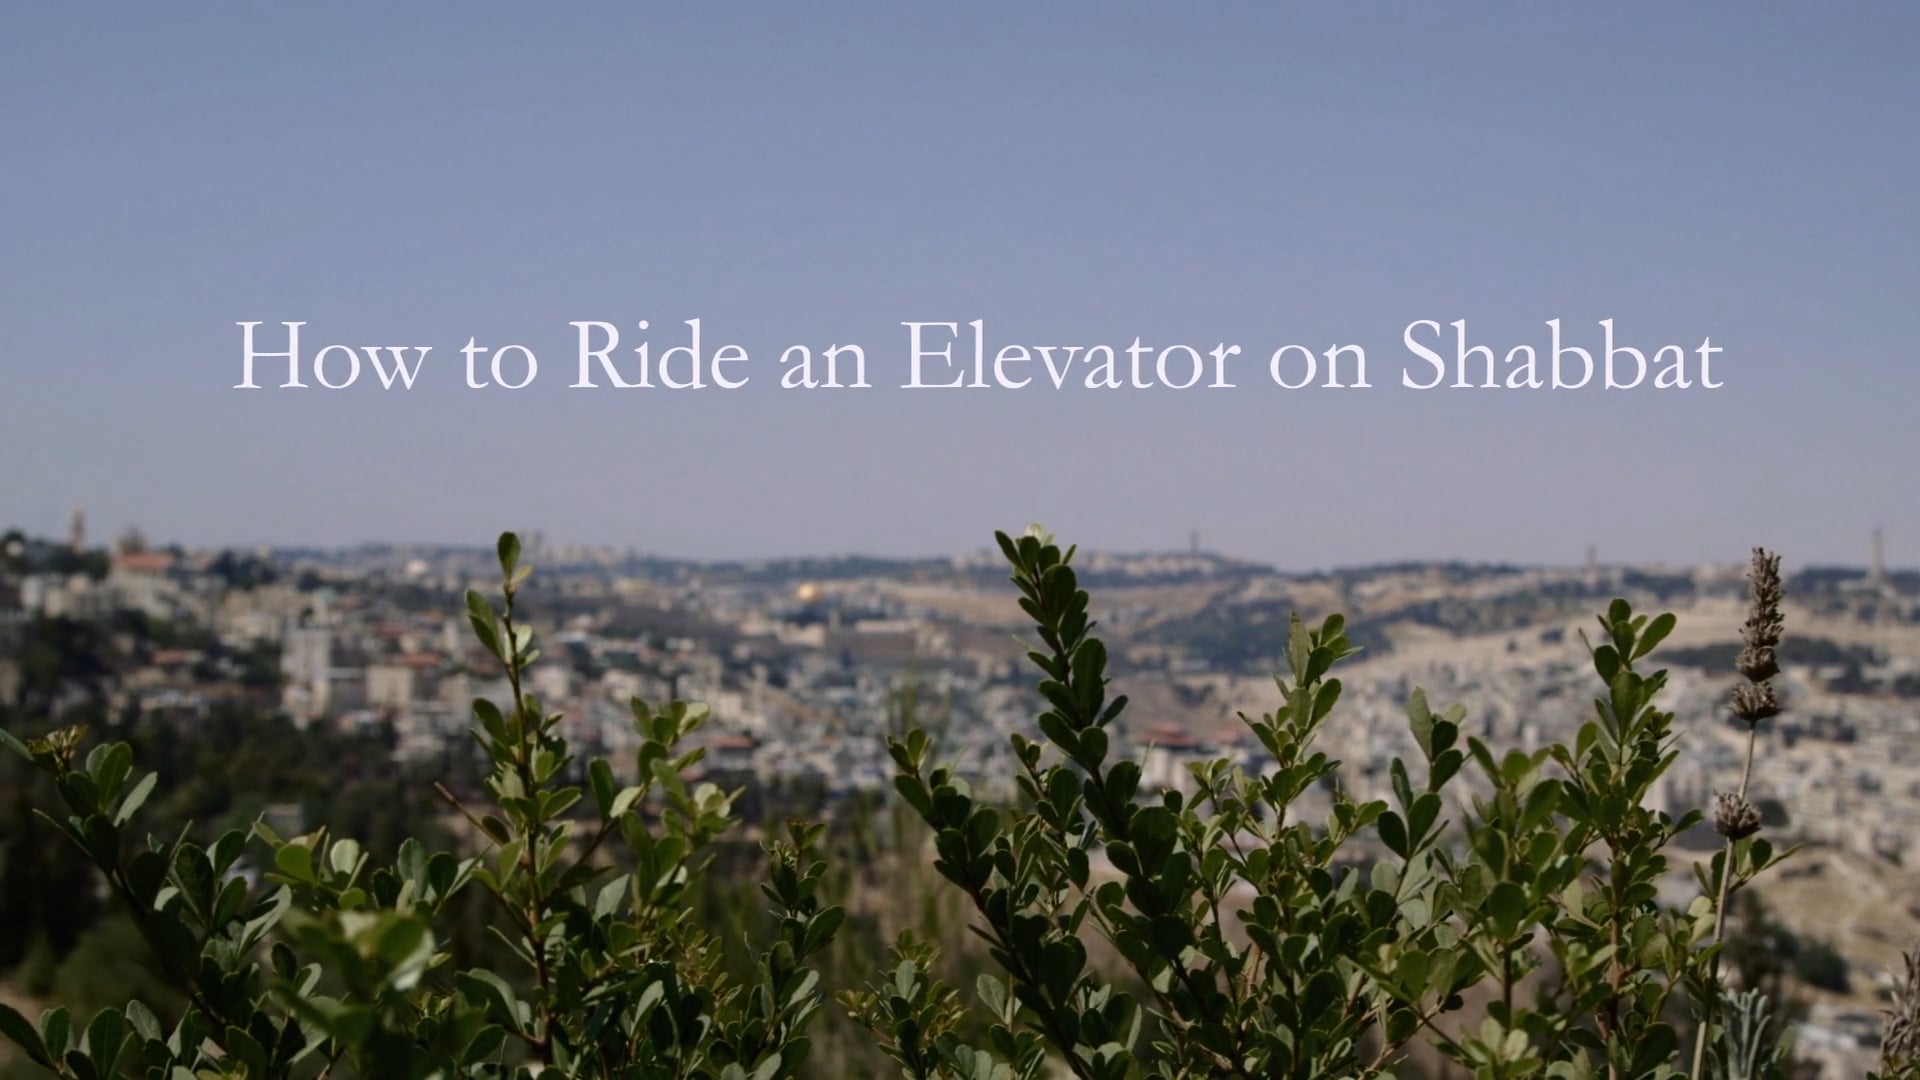 How to Ride an Elevator on Shabbat